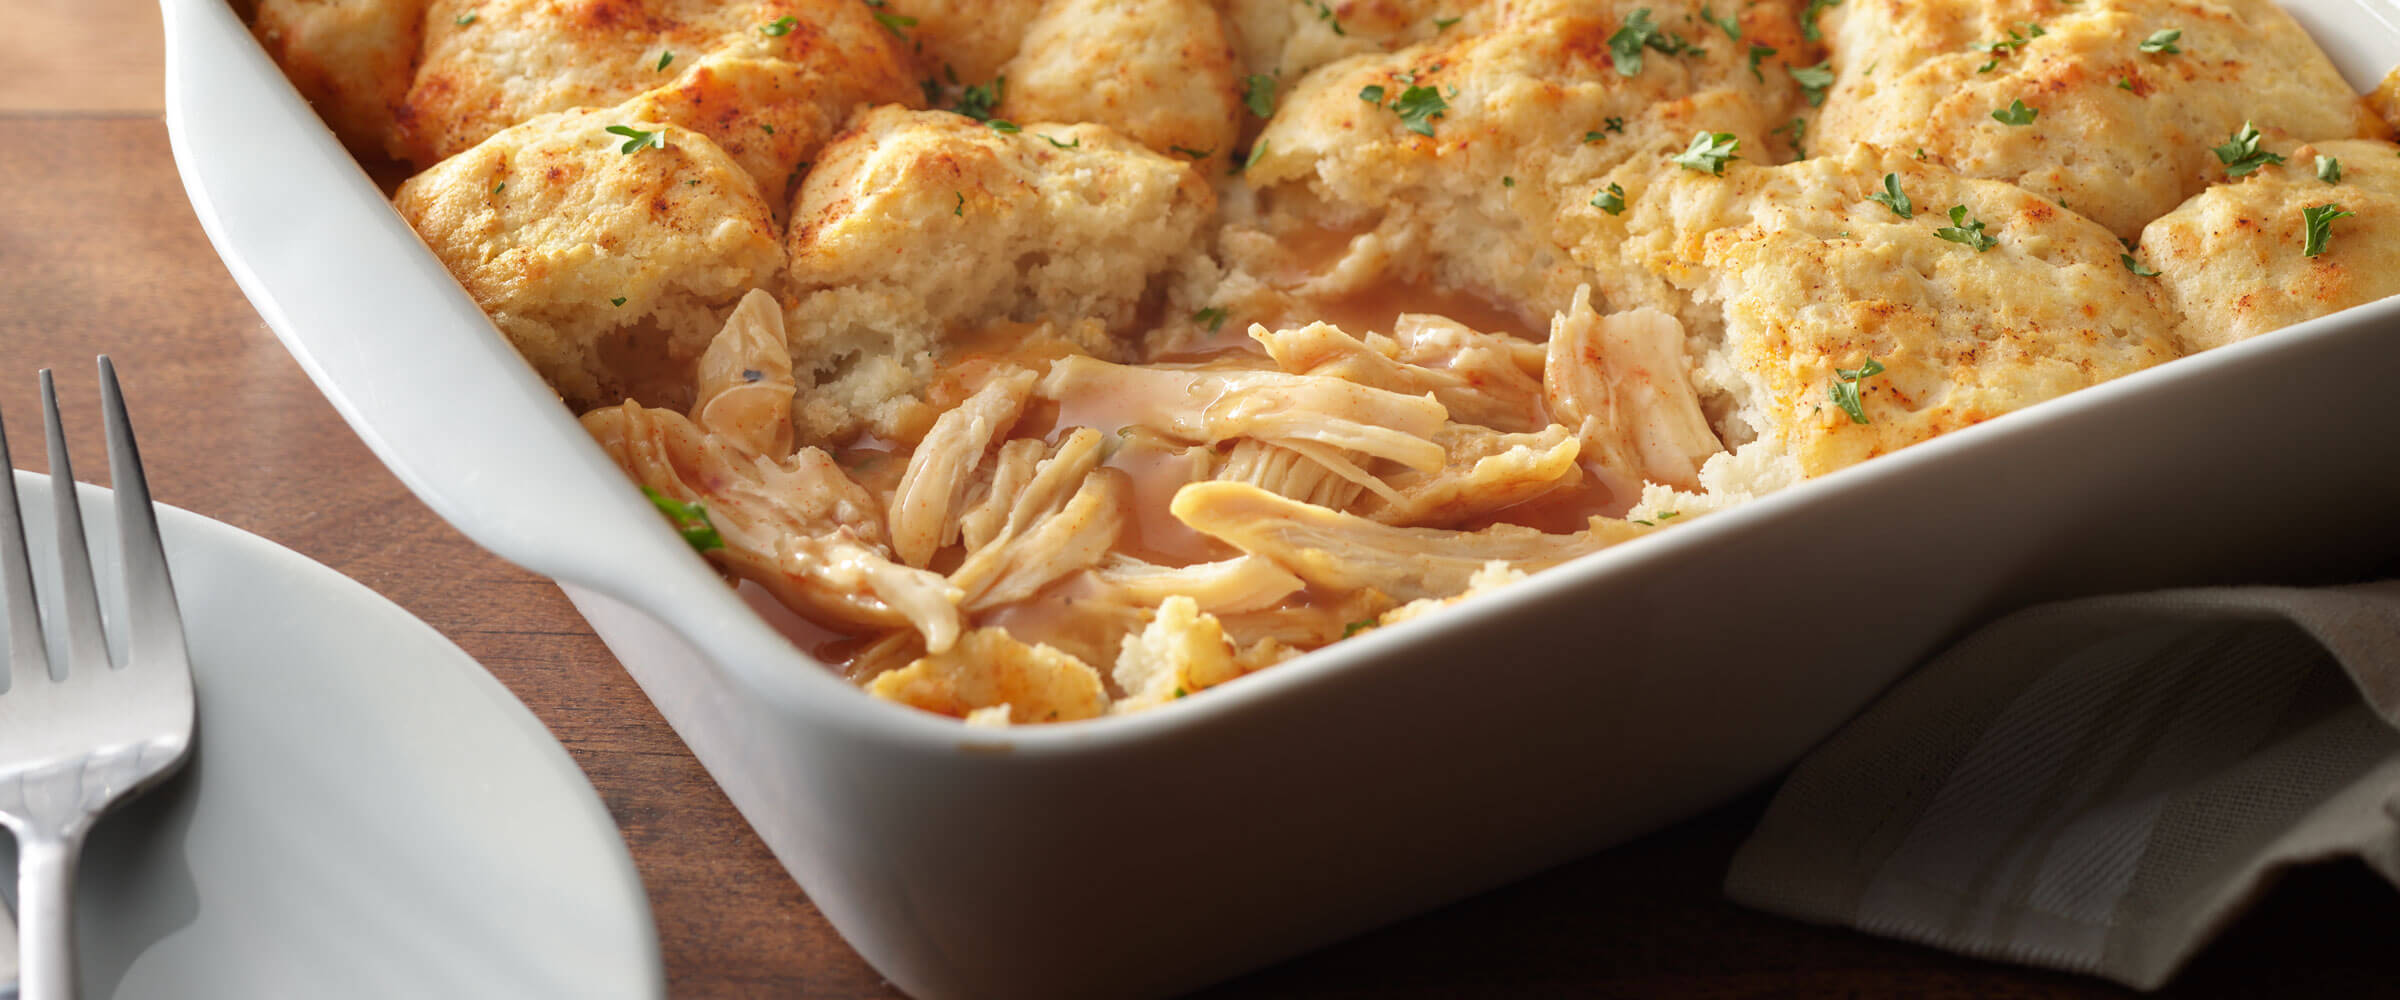 Chicken Biscuits and Gravy Casserole in white dish with fork